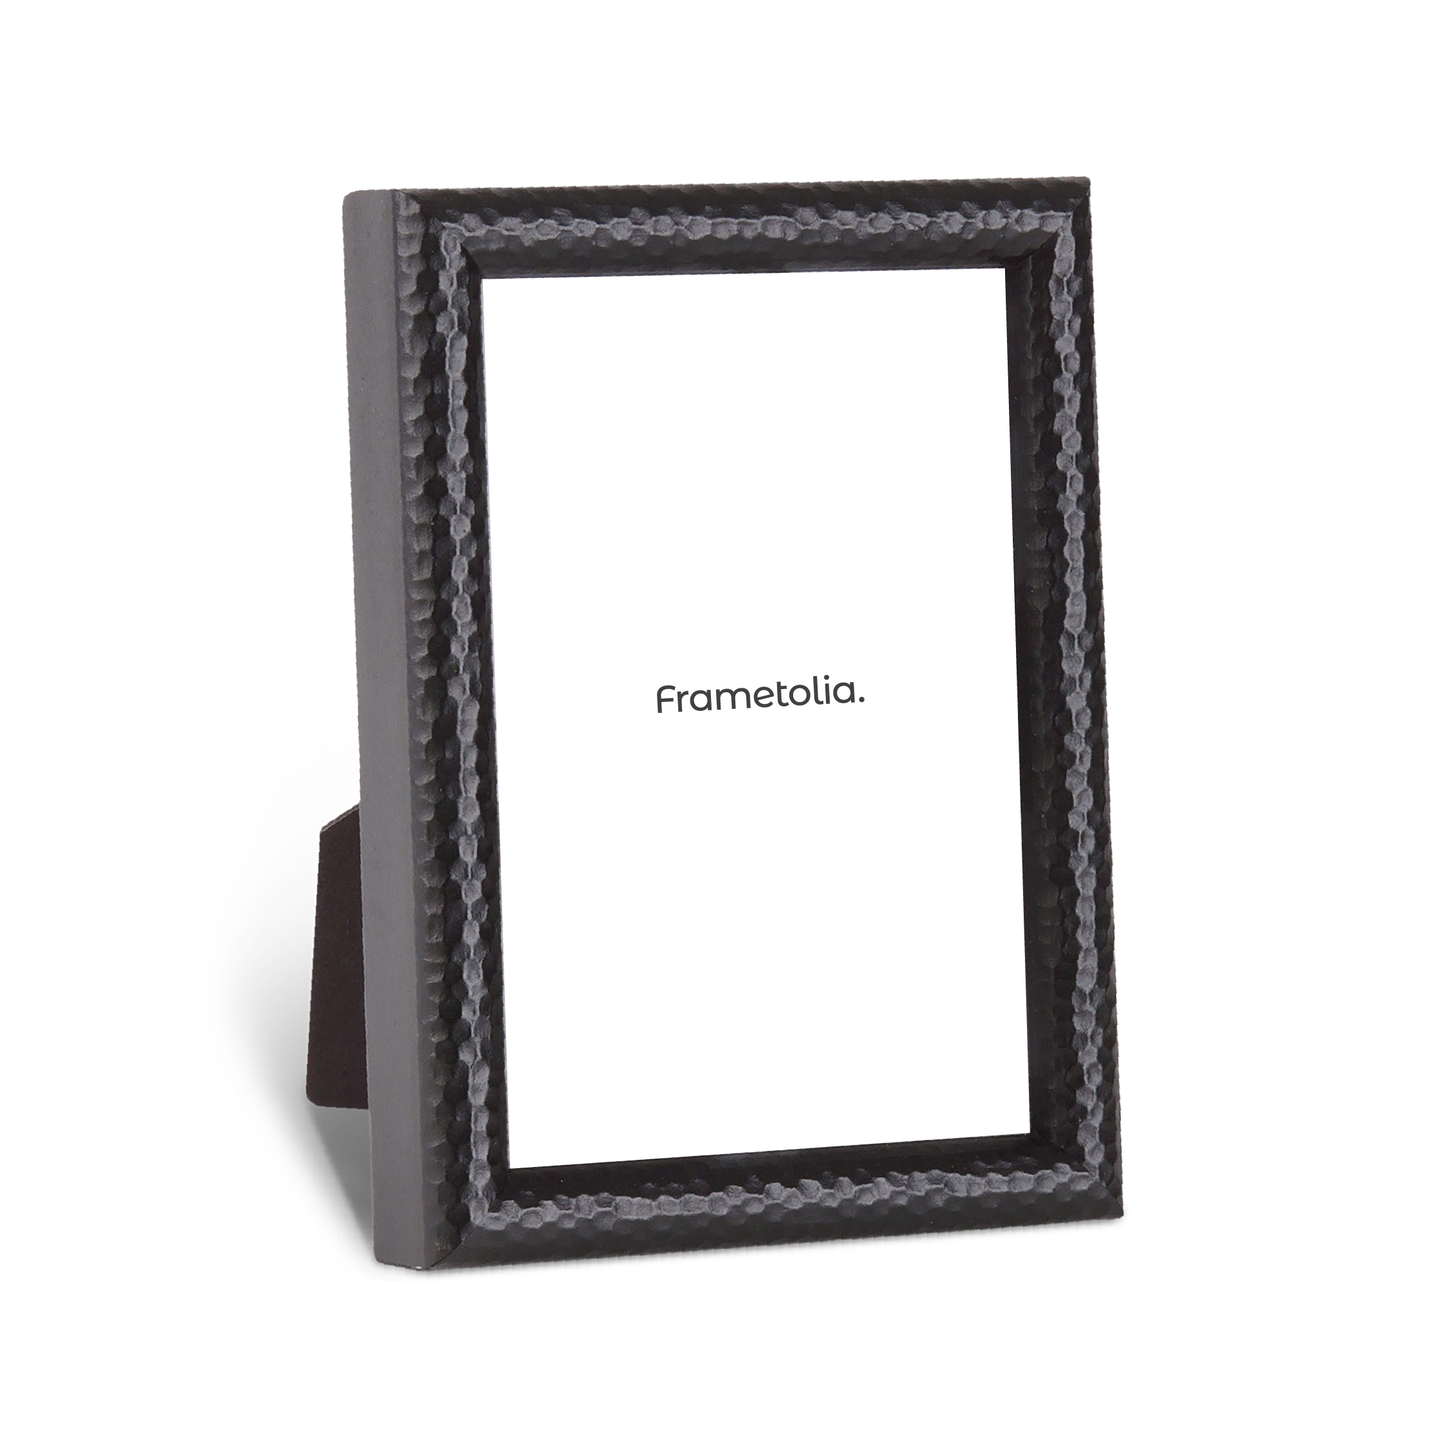 Hammered Black Narrow Width Table Top Frame